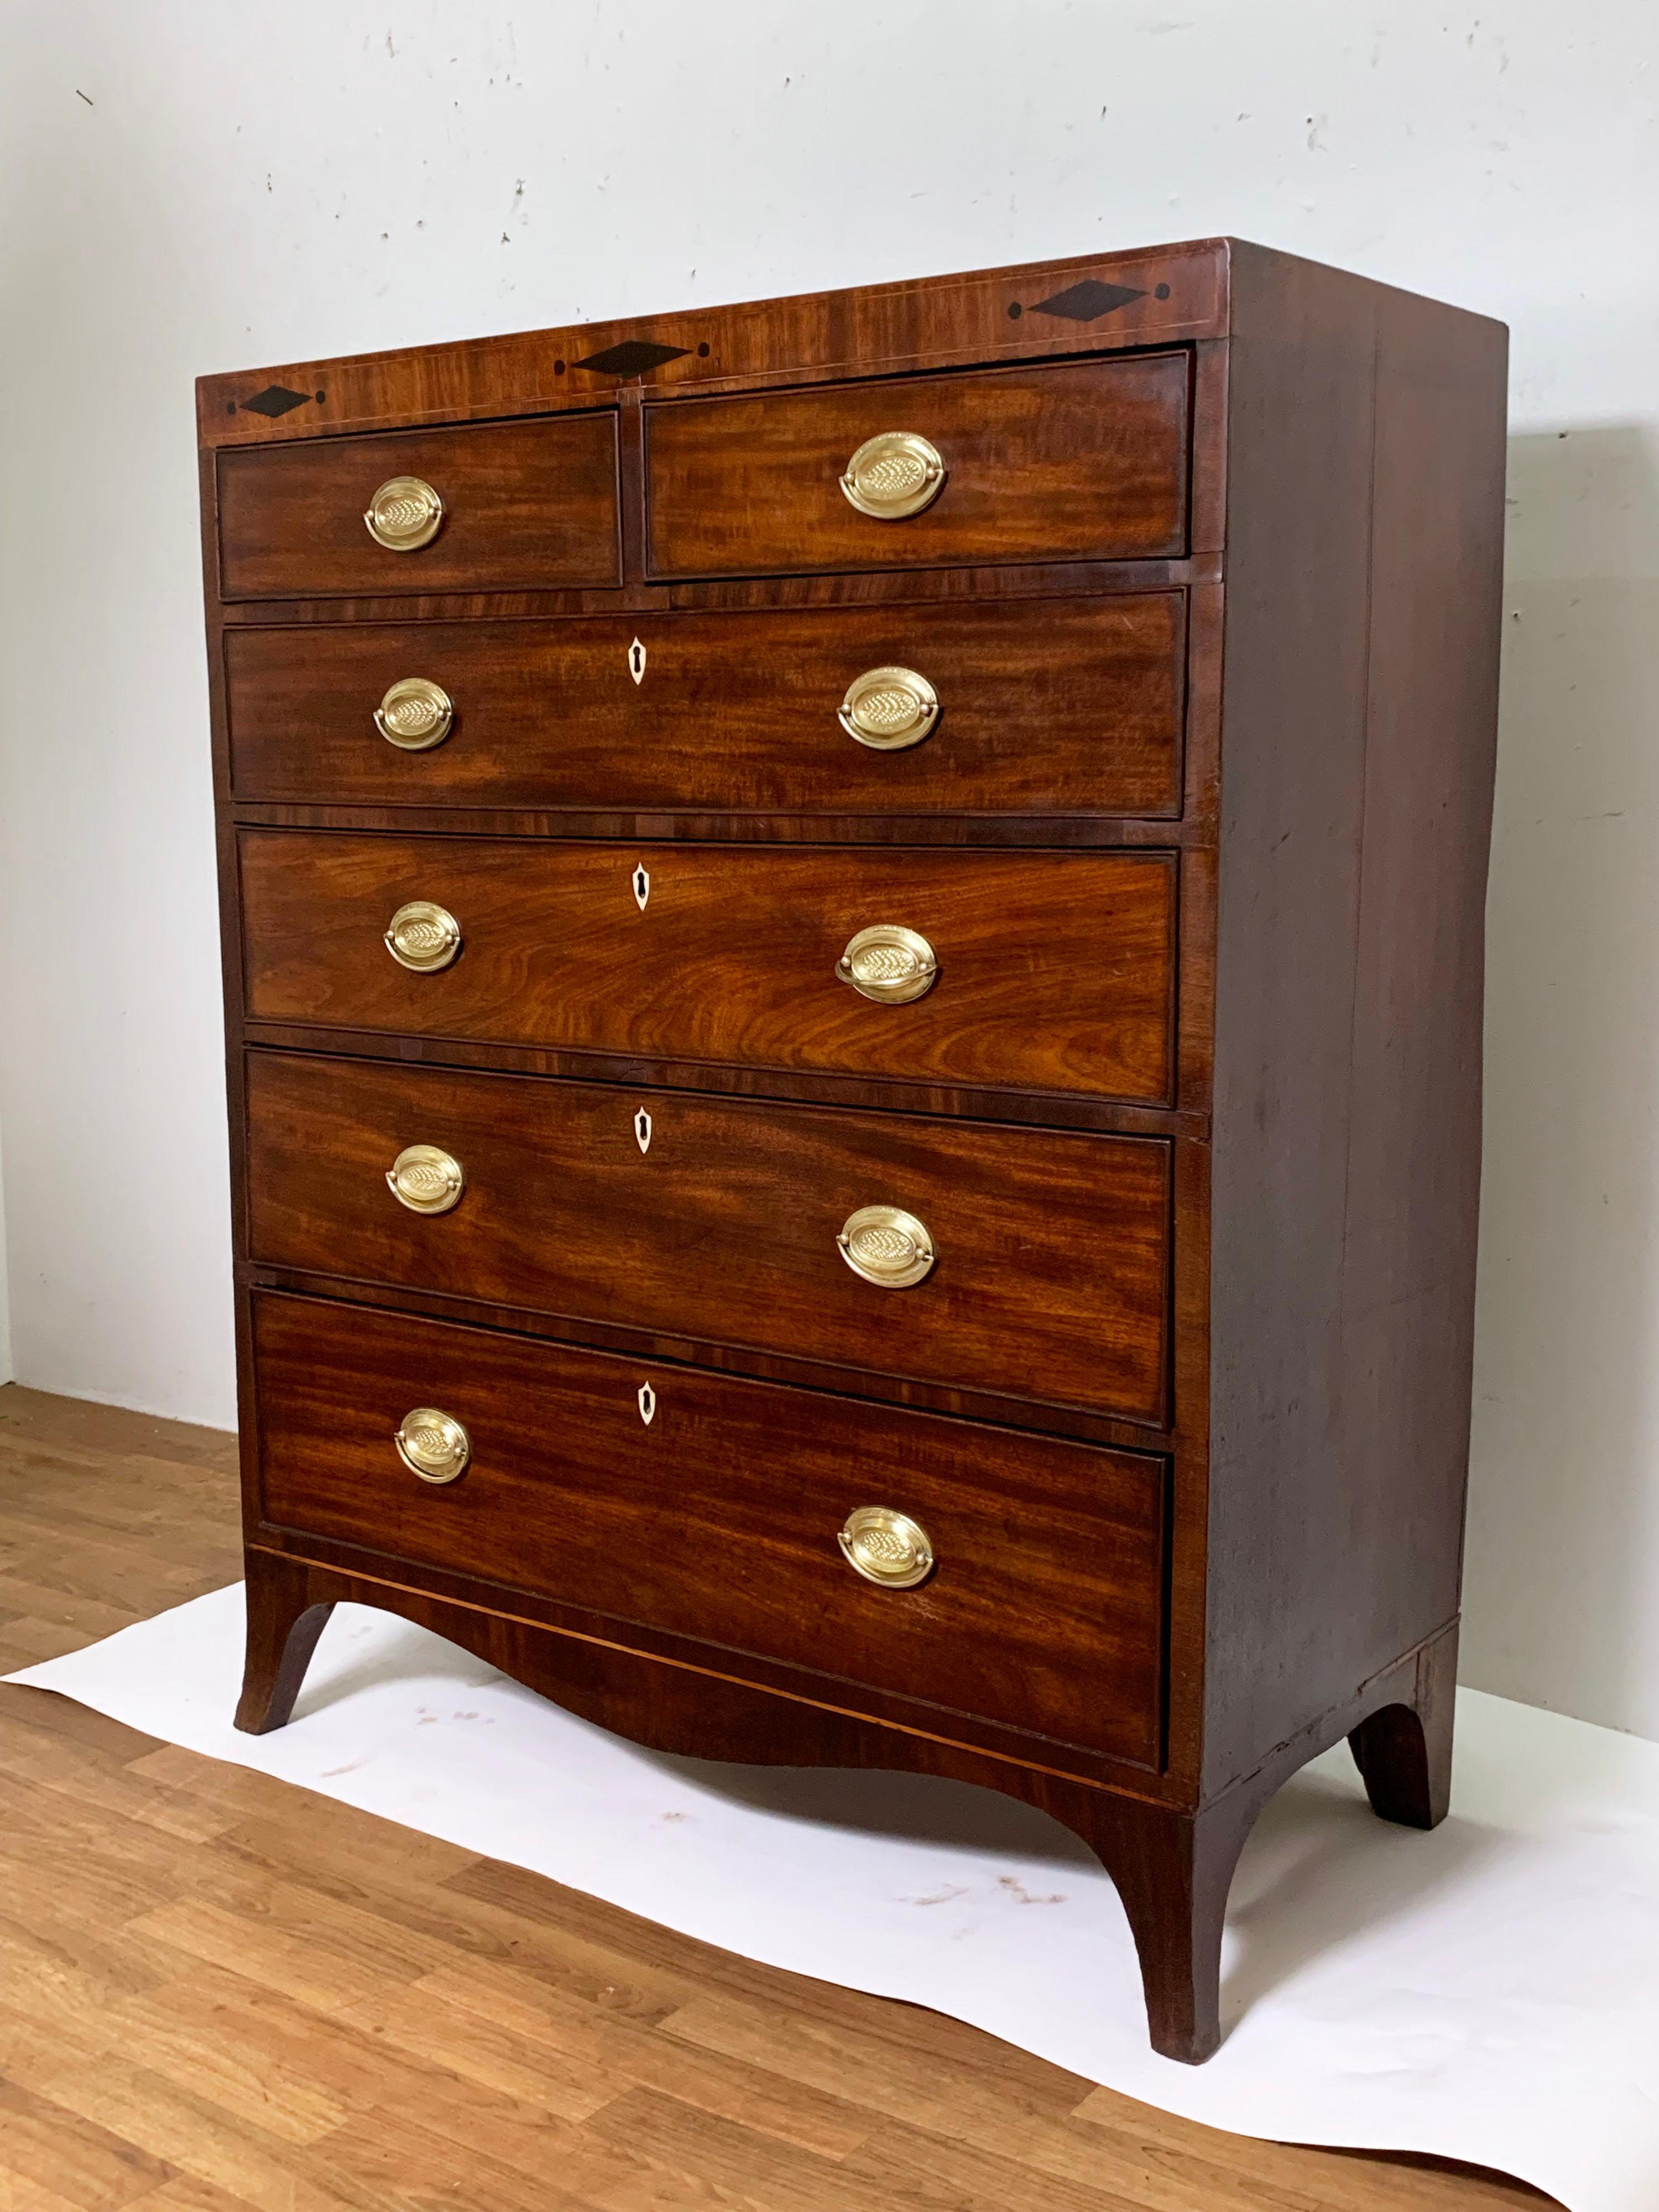 An English Hepplewhite chest of two drawers over four graduated drawers in walnut with serpentine skirt and ebony inlaid crosshead. This period chest features several drawers lined with page from The York Herald newspaper dated 1818.